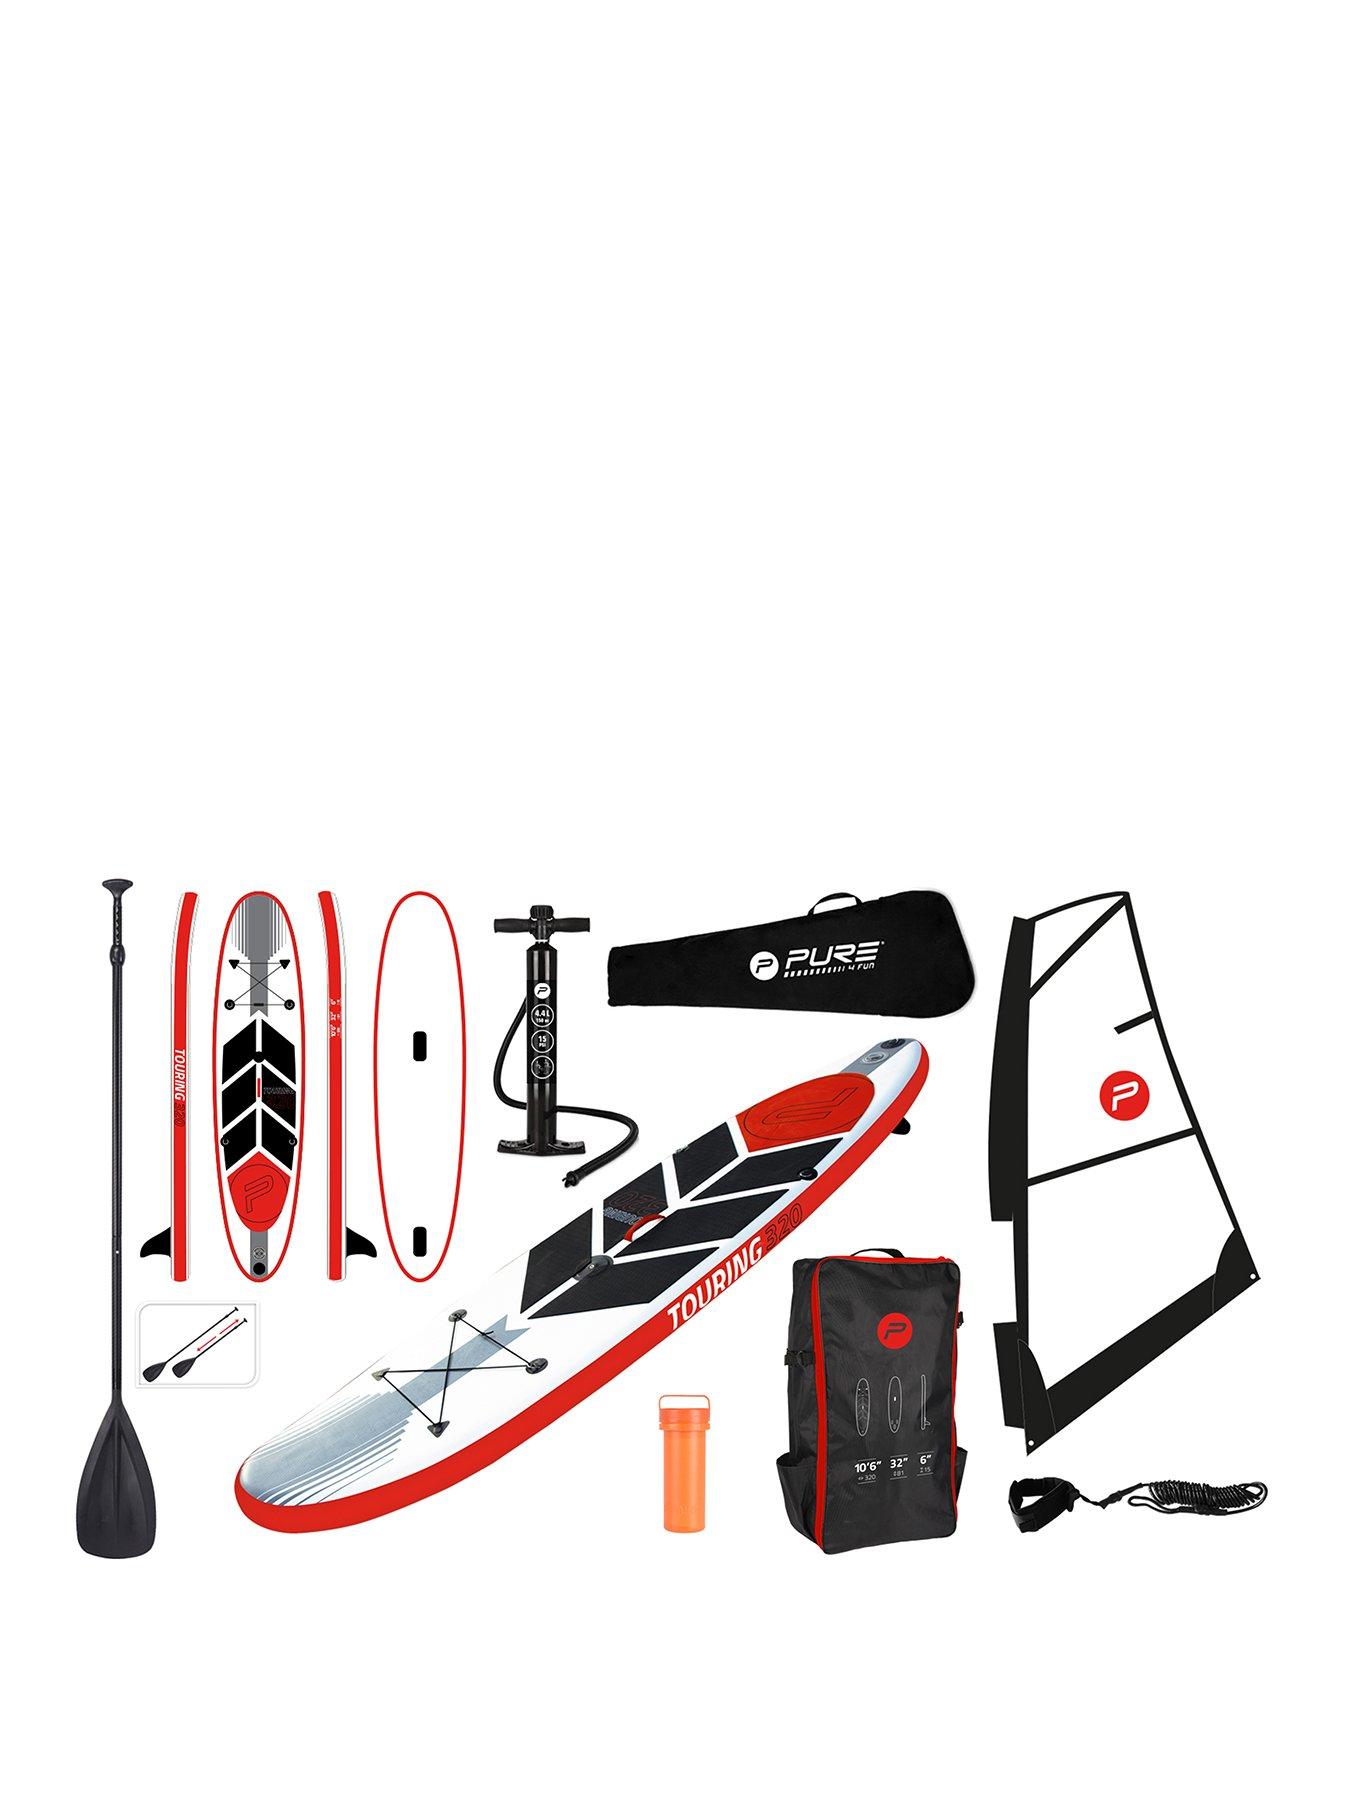 Pure Windsurf Sup Inflatable Stand Up Paddle Board 10.5 Feet - Complete Set With Pump, Patch Tool, Foot Lead, Adjustable Paddle And Waterproof 2L Bag